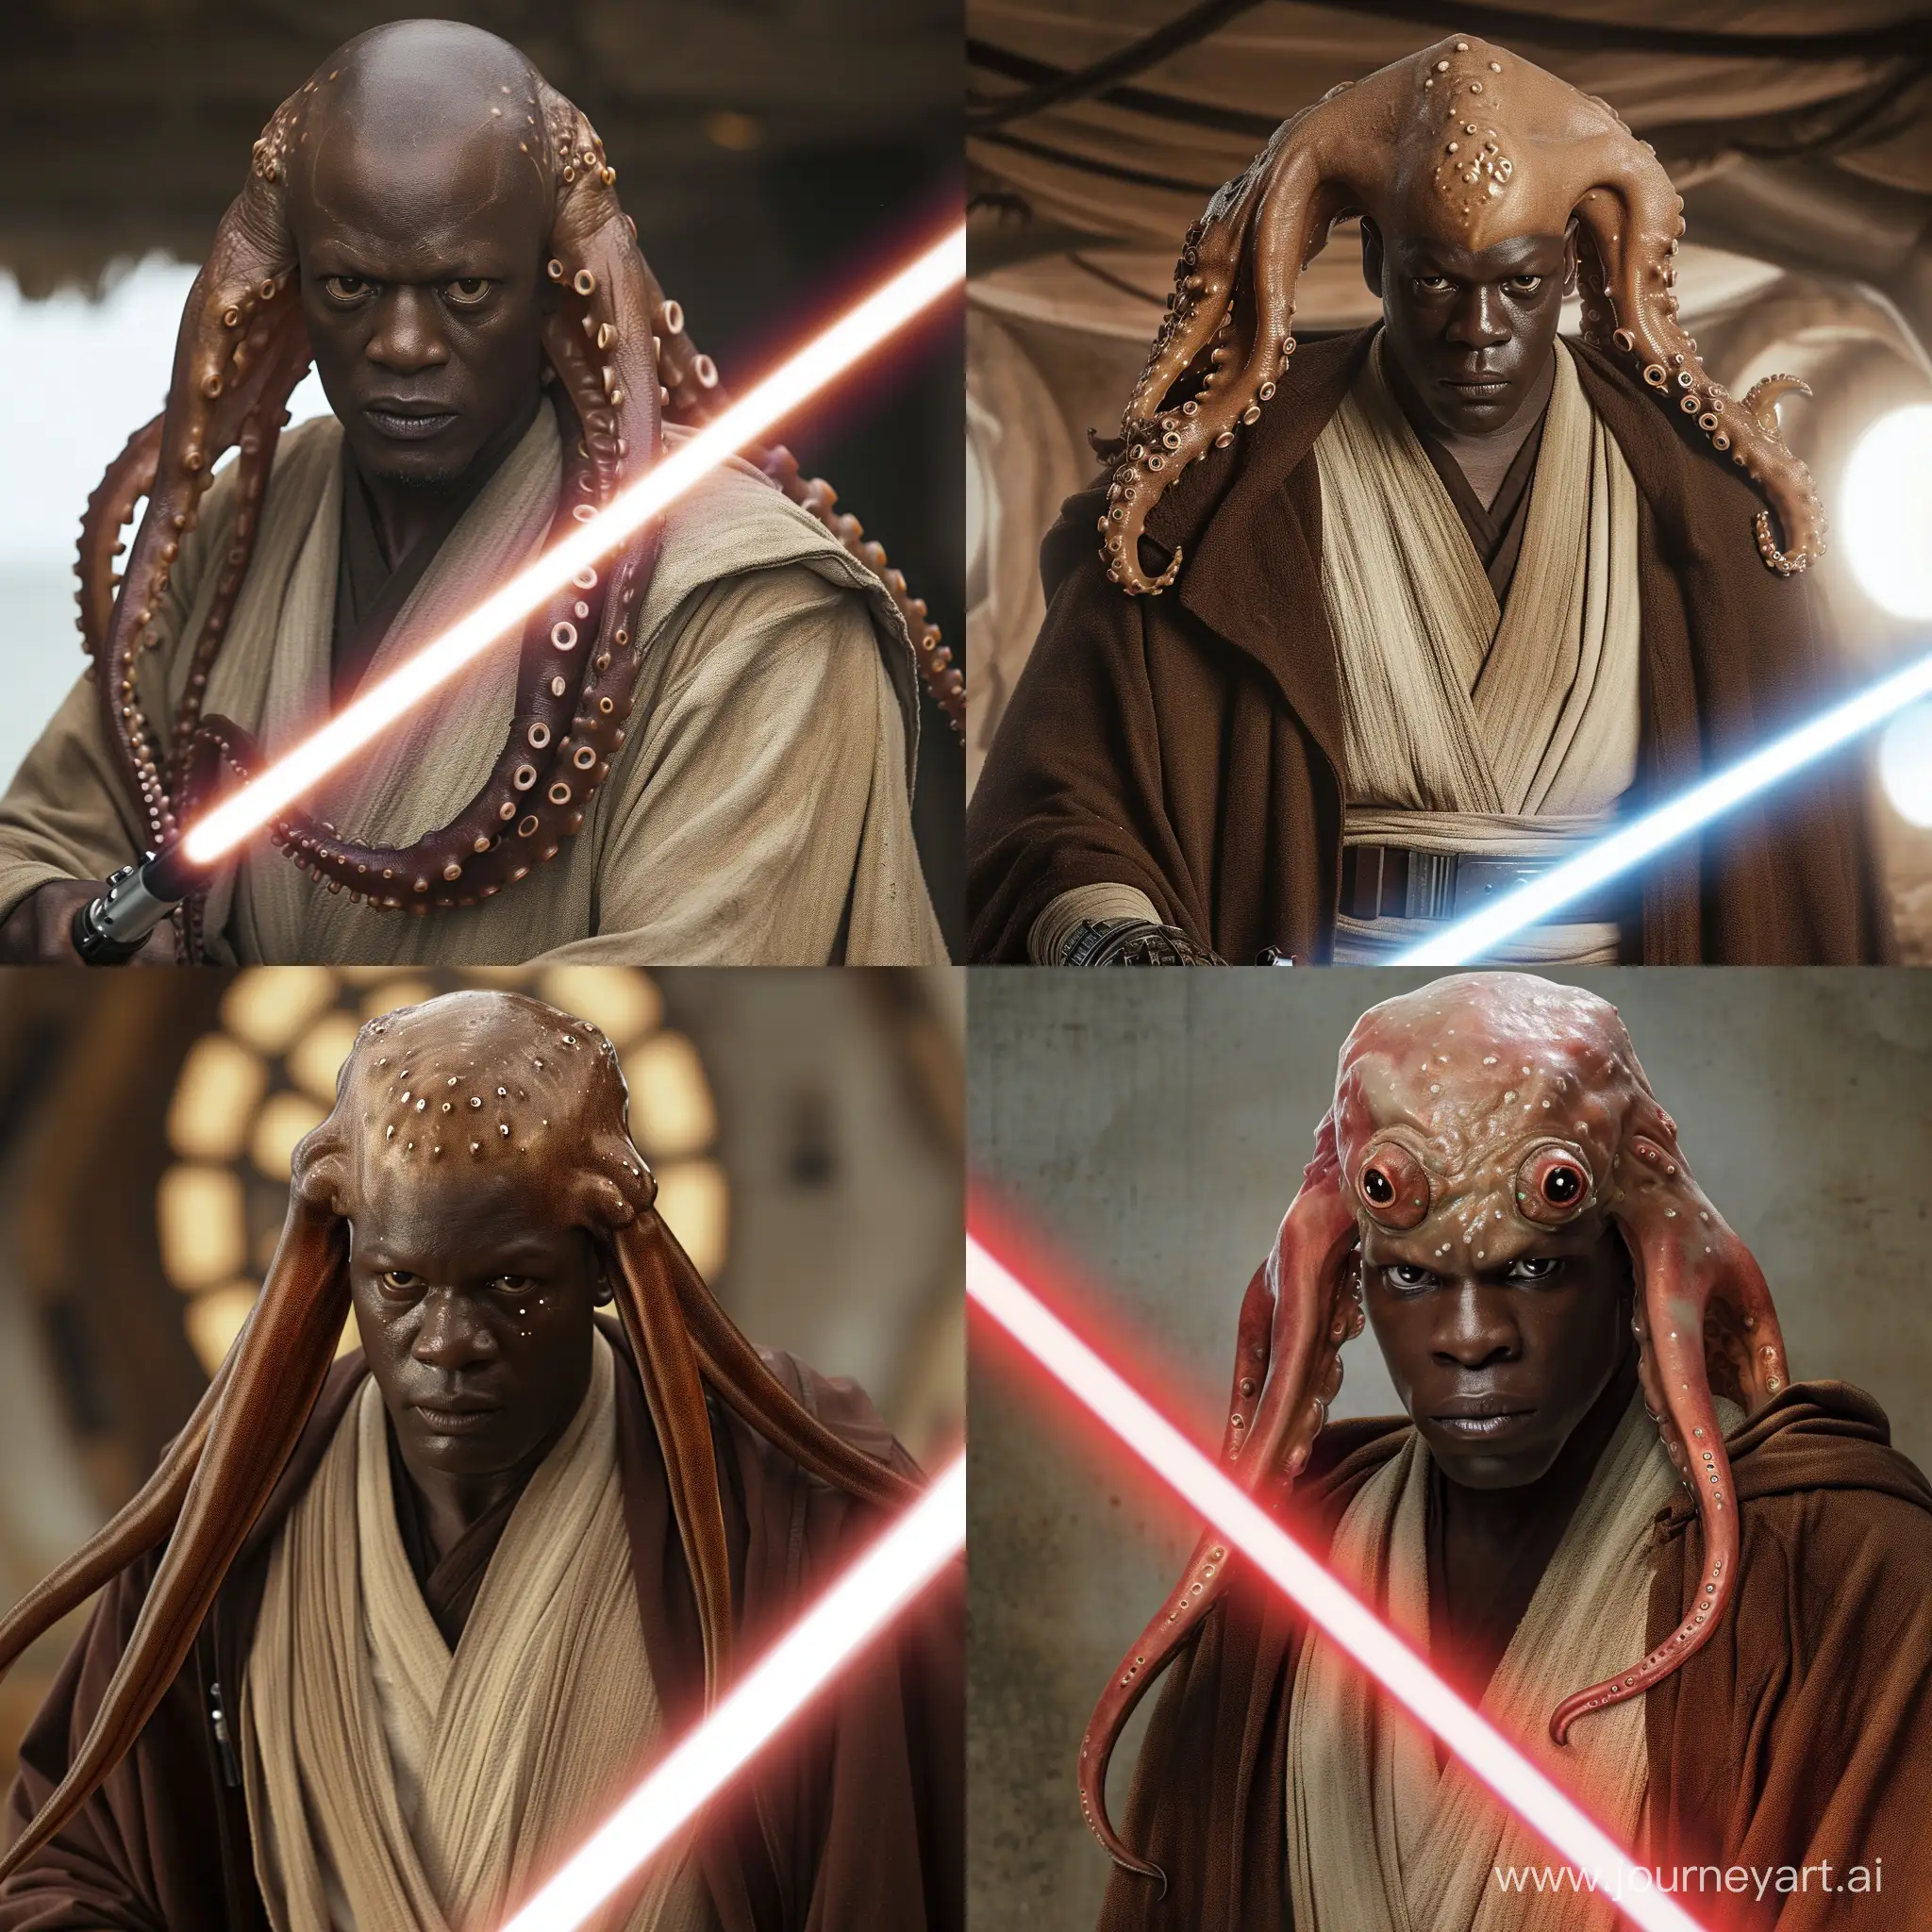 Generate an image featuring Djimon Hounsou as the skilled and amphibious Jedi Master Kit Fisto from Star Wars. Embody the calm and wise demeanor of Kit Fisto, with Djimon Hounsou portraying the character in his distinctive Jedi attire. Pay attention to the details of Kit Fisto's head tentacles, lightsaber, and the overall aura of a capable and seasoned Jedi. Ensure that Djimon Hounsou brings his unique charisma to the portrayal, capturing the essence of Kit Fisto's mastery in lightsaber combat and his peaceful nature. Create an image that reflects both the strength and serenity that define Kit Fisto in the Star Wars universe.